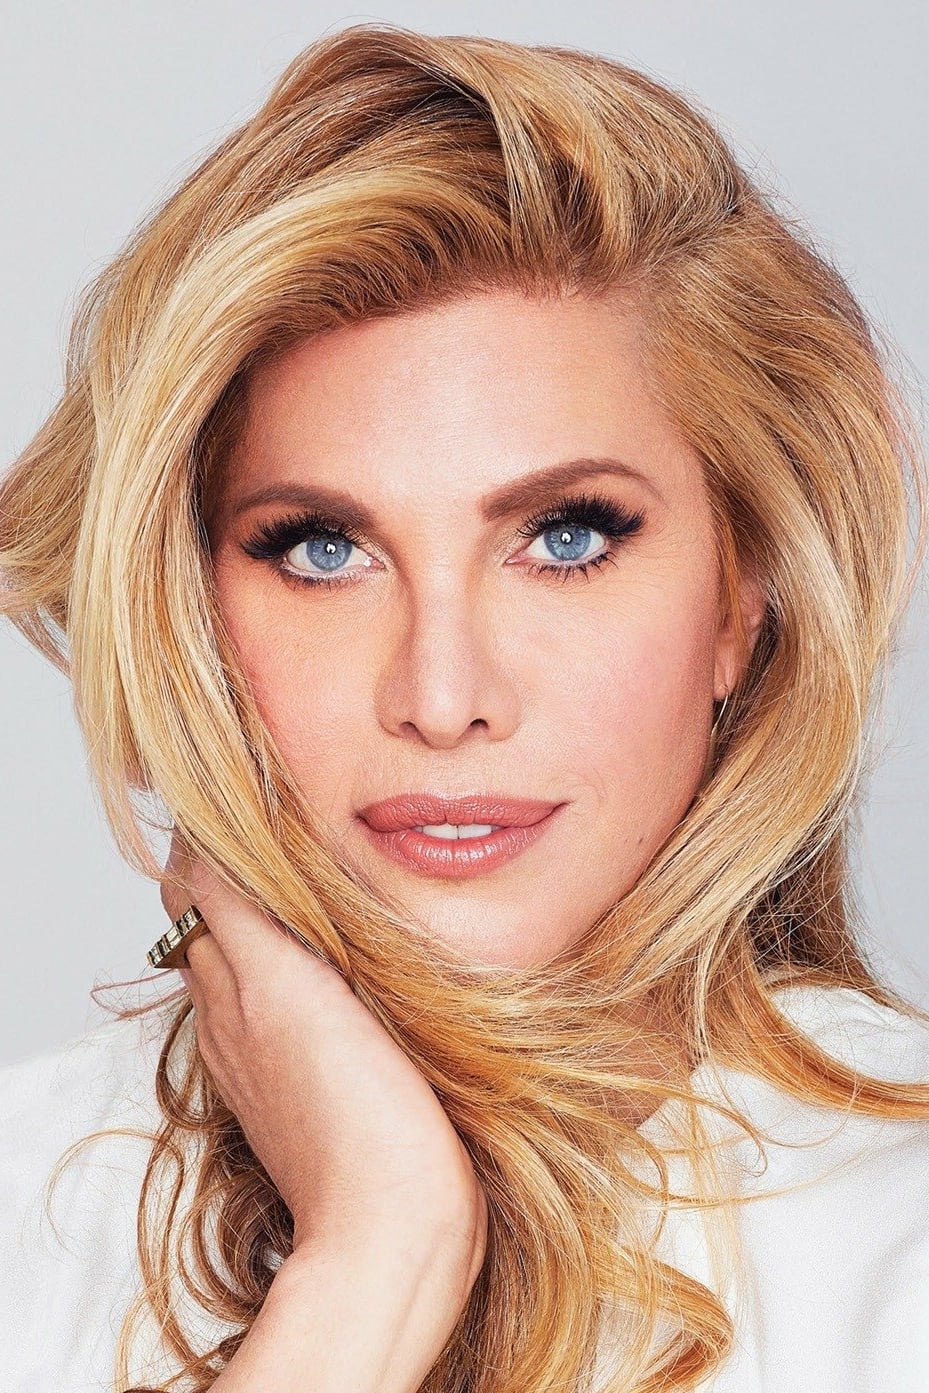 Candis cayne pictures